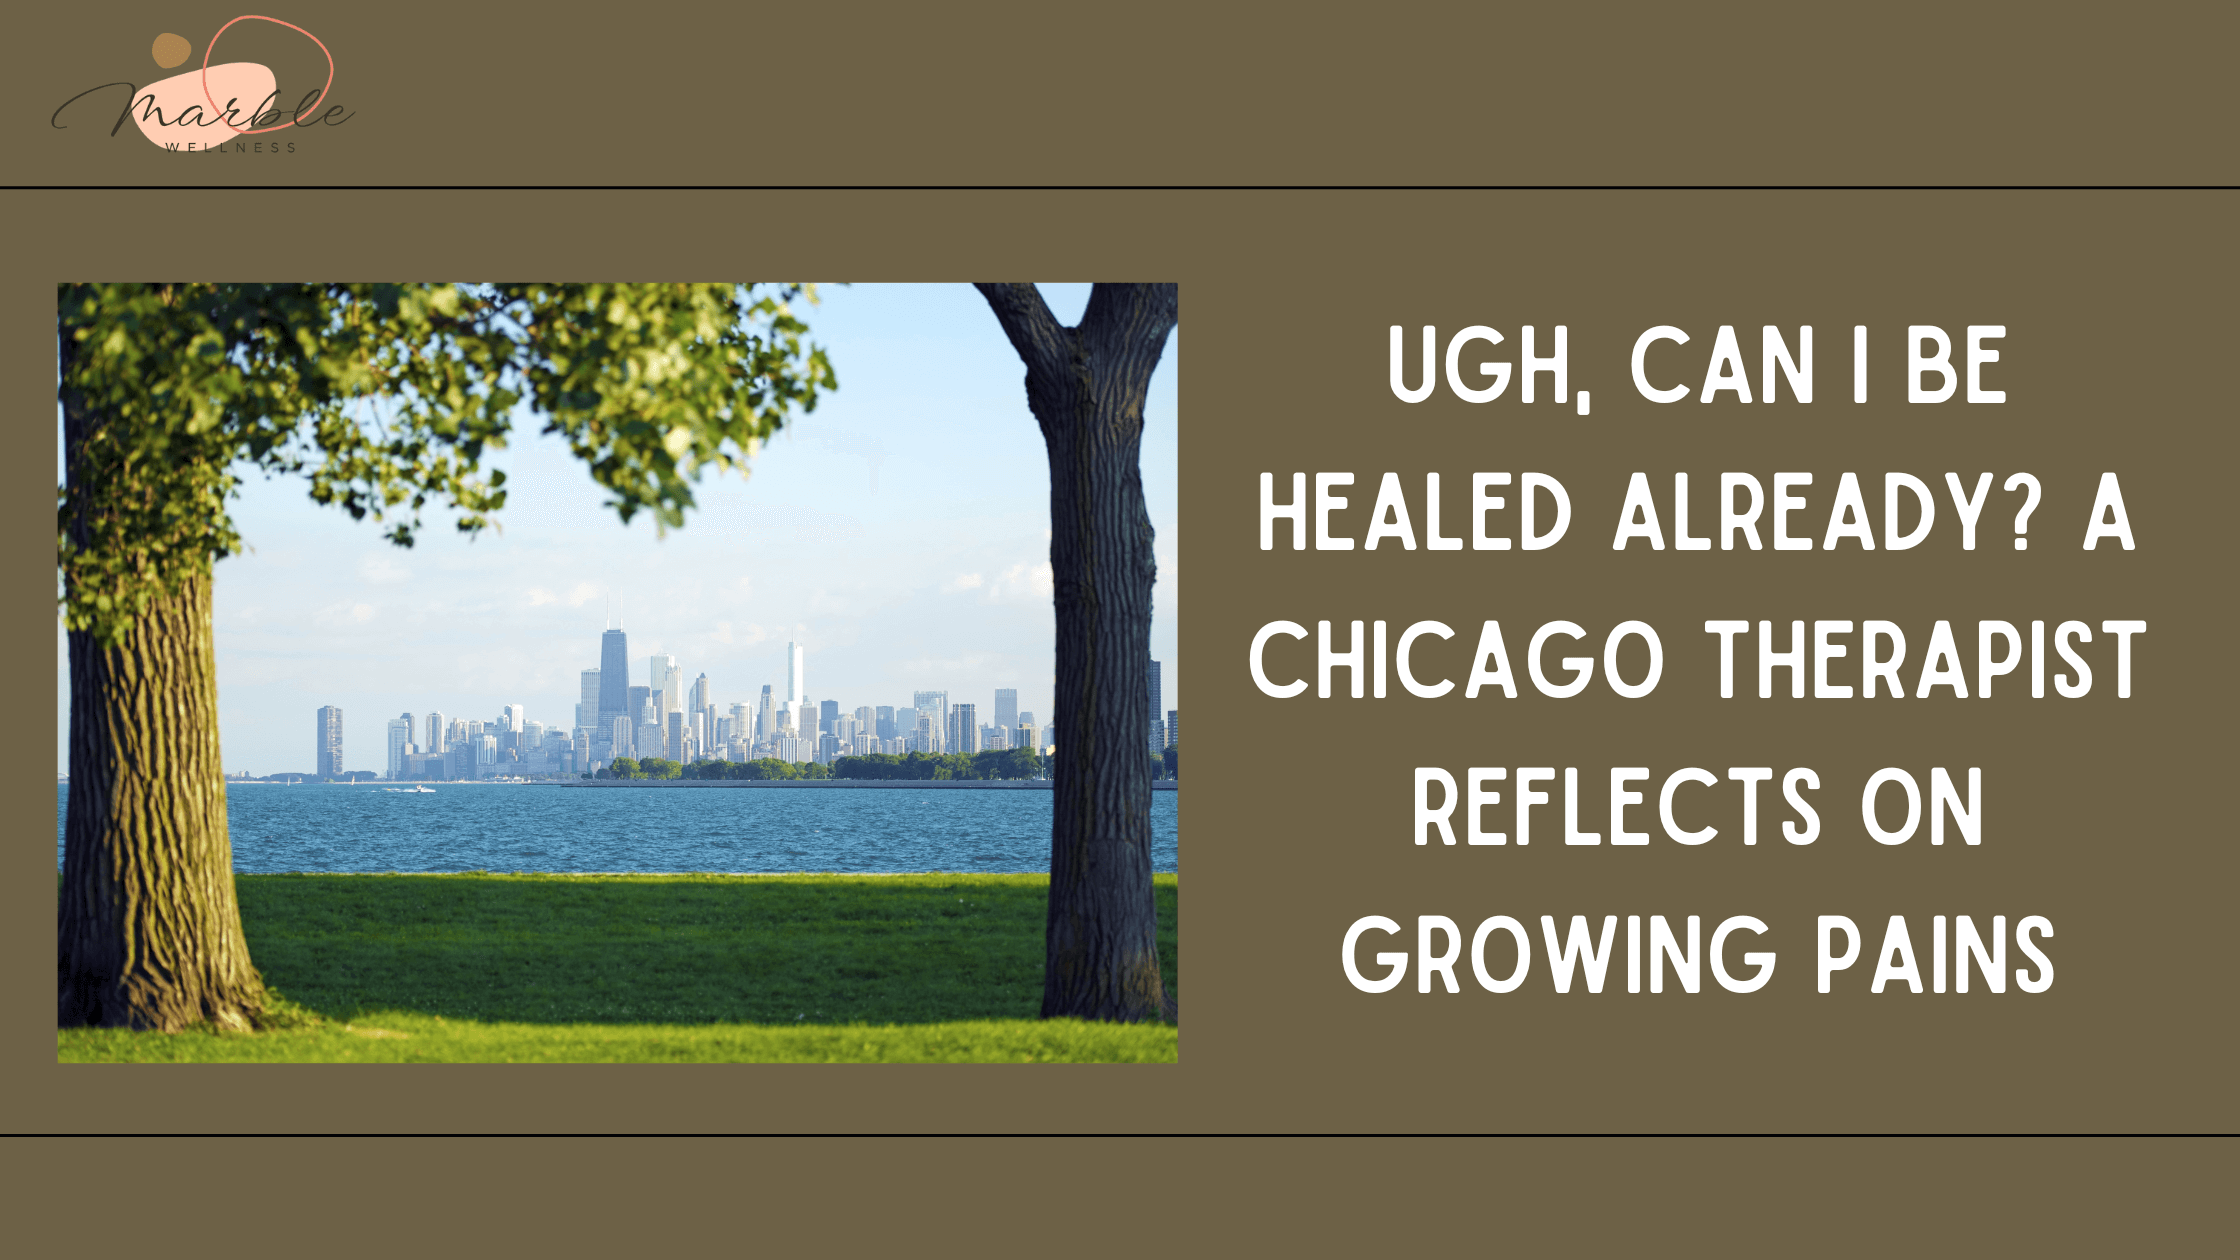 Photo of Chicago skyline through park trees with text: "Ugh, Can I Be Healed Already? A Chicago Therapist Reflects on Growing Pains"